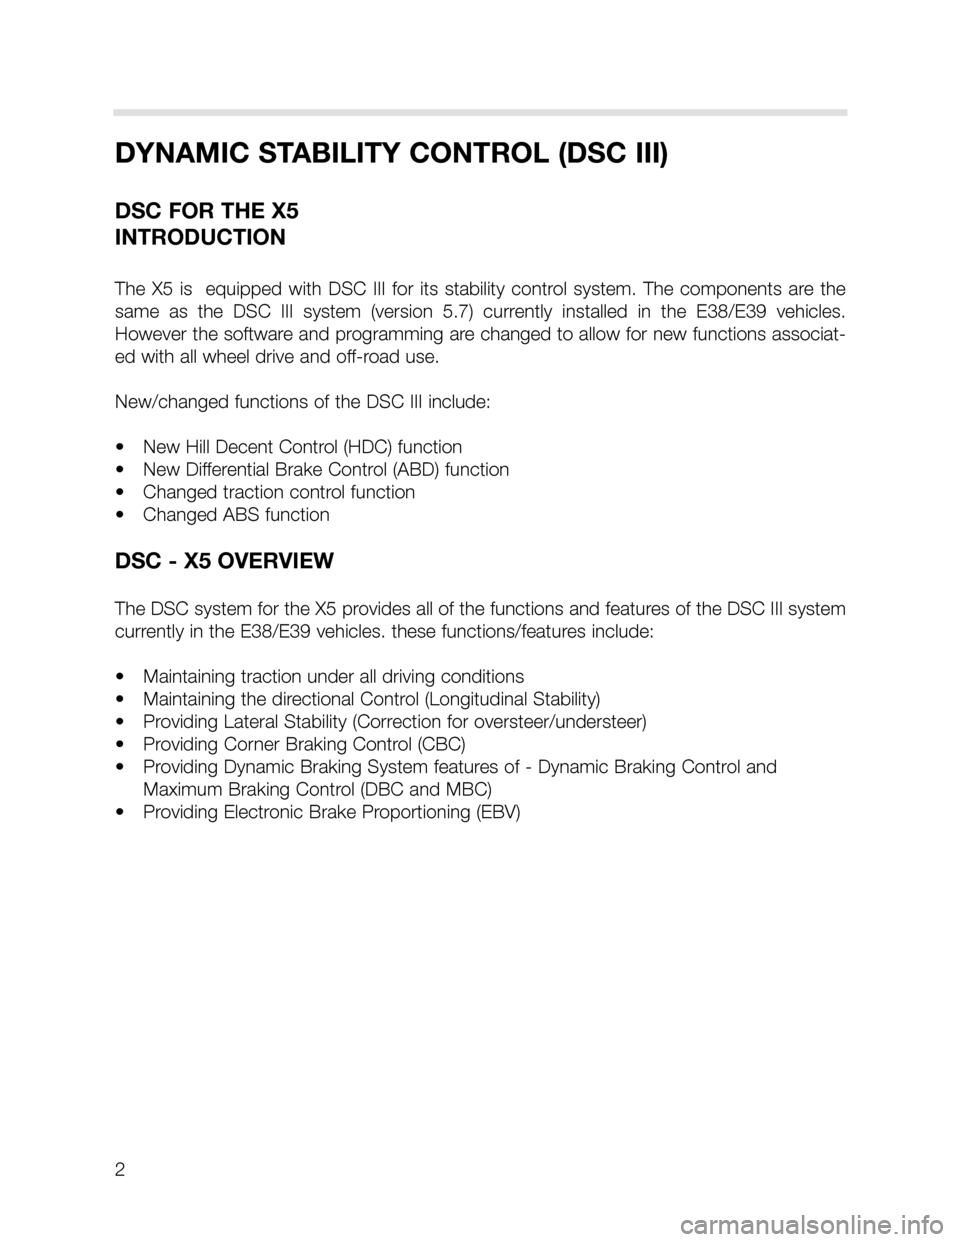 BMW X5 2003 E53 DSC System Workshop Manual 2
DYNAMIC STABILITY CONTROL (DSC III)
DSC FOR THE X5
INTRODUCTION
The  X5  is    equipped  with  DSC  III  for  its  stability  control  system.  The  components  are  the
same  as  the  DSC  III  sys